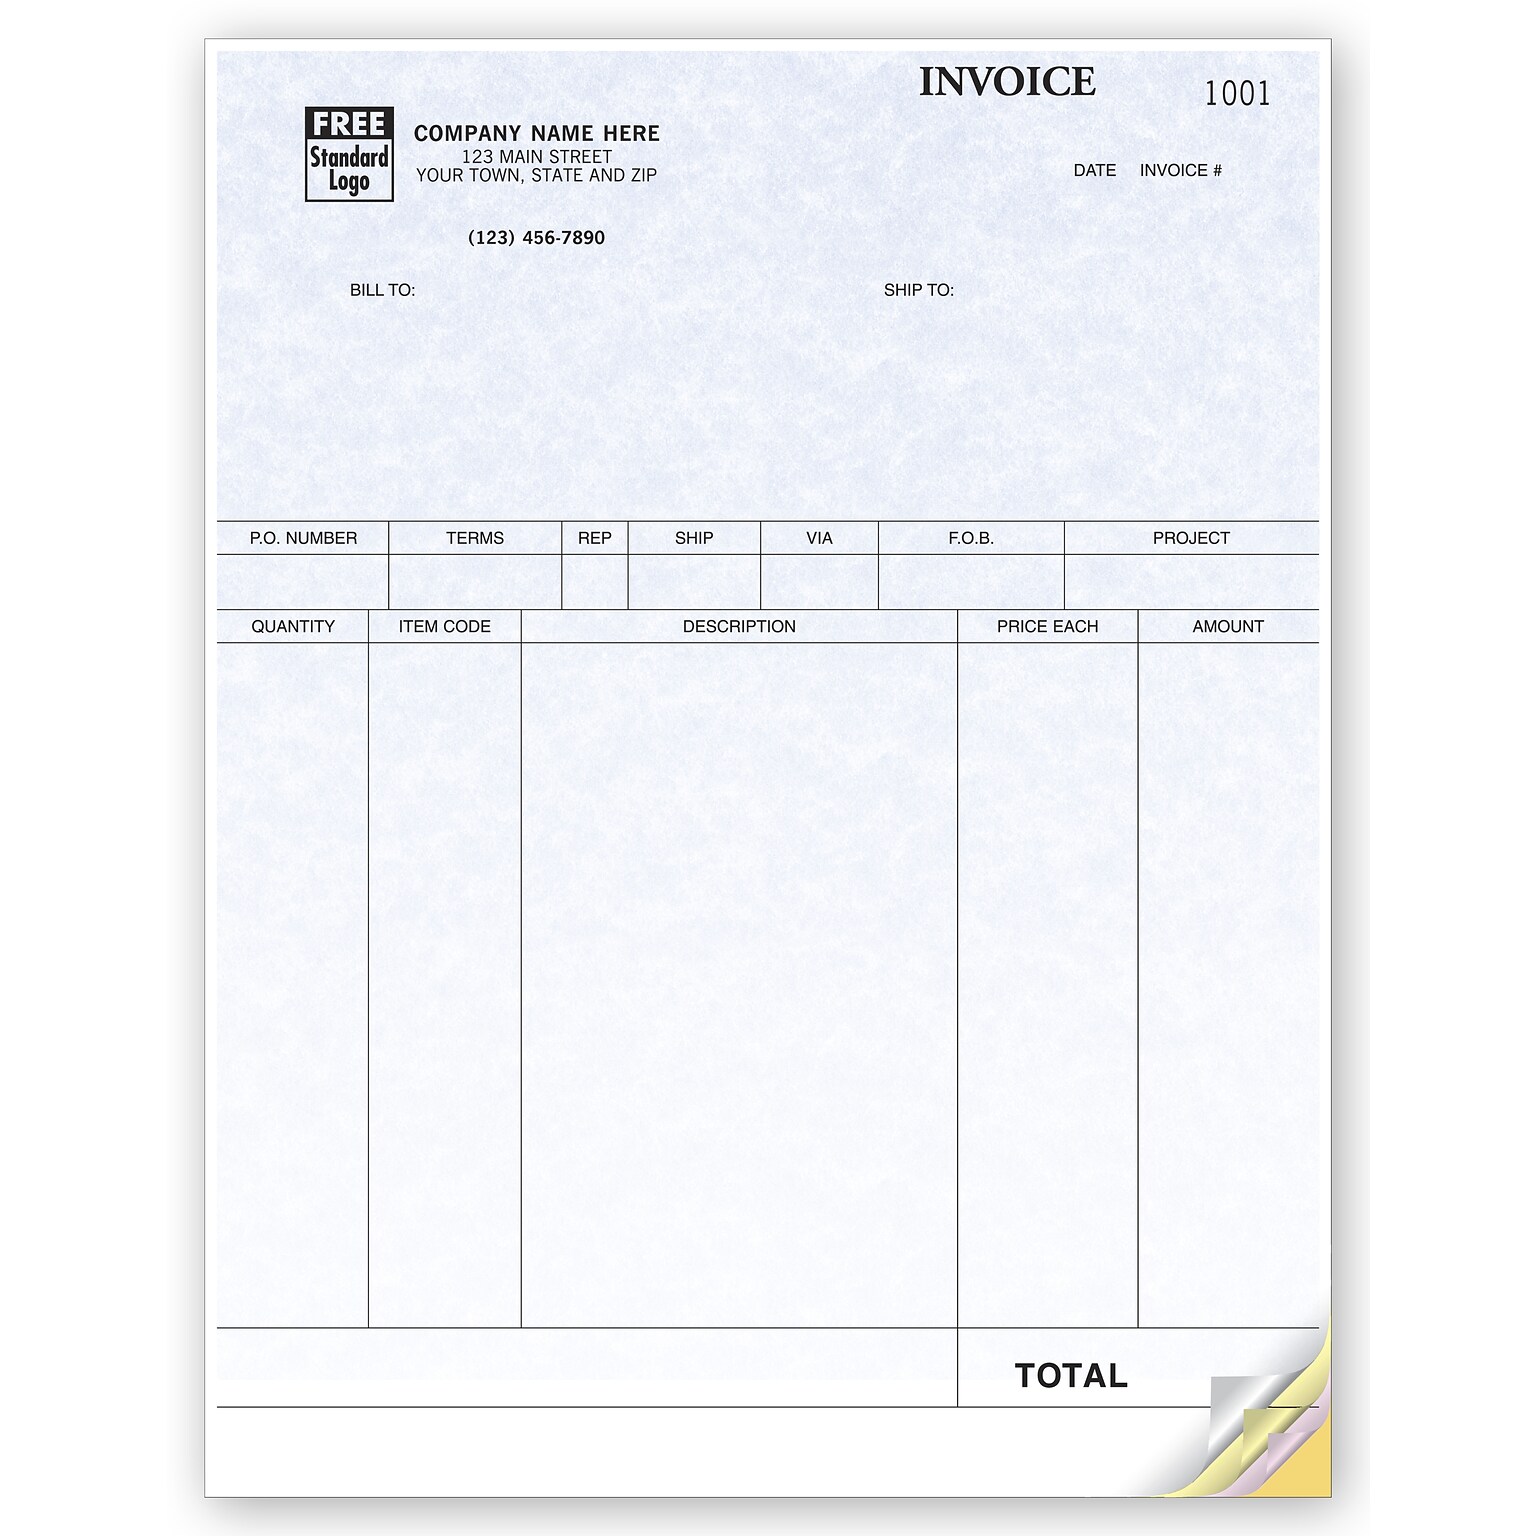 Custom Product Invoices, Laser, 2 Parts, 1 Color Printing, 8 1/2 x 11, 500/Pack